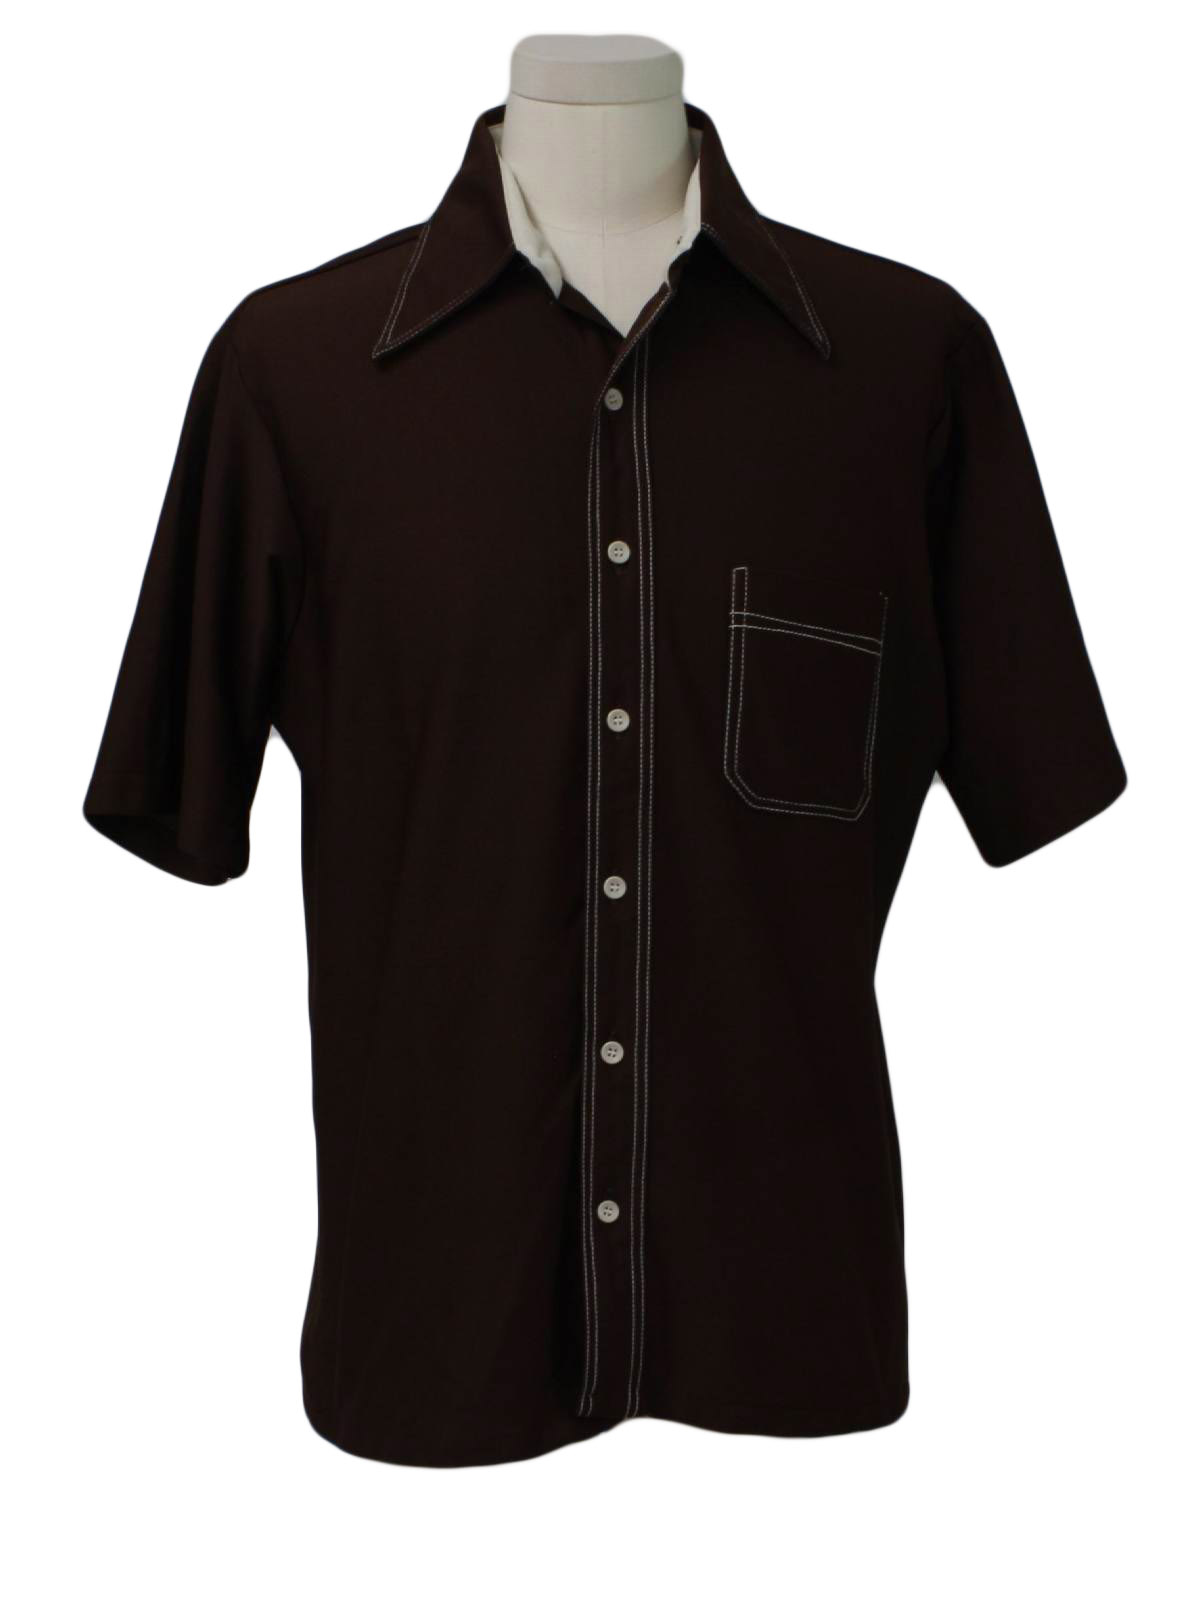 1970 s jcpenney mens sport shirt 70s jcpenney mens brown background ...